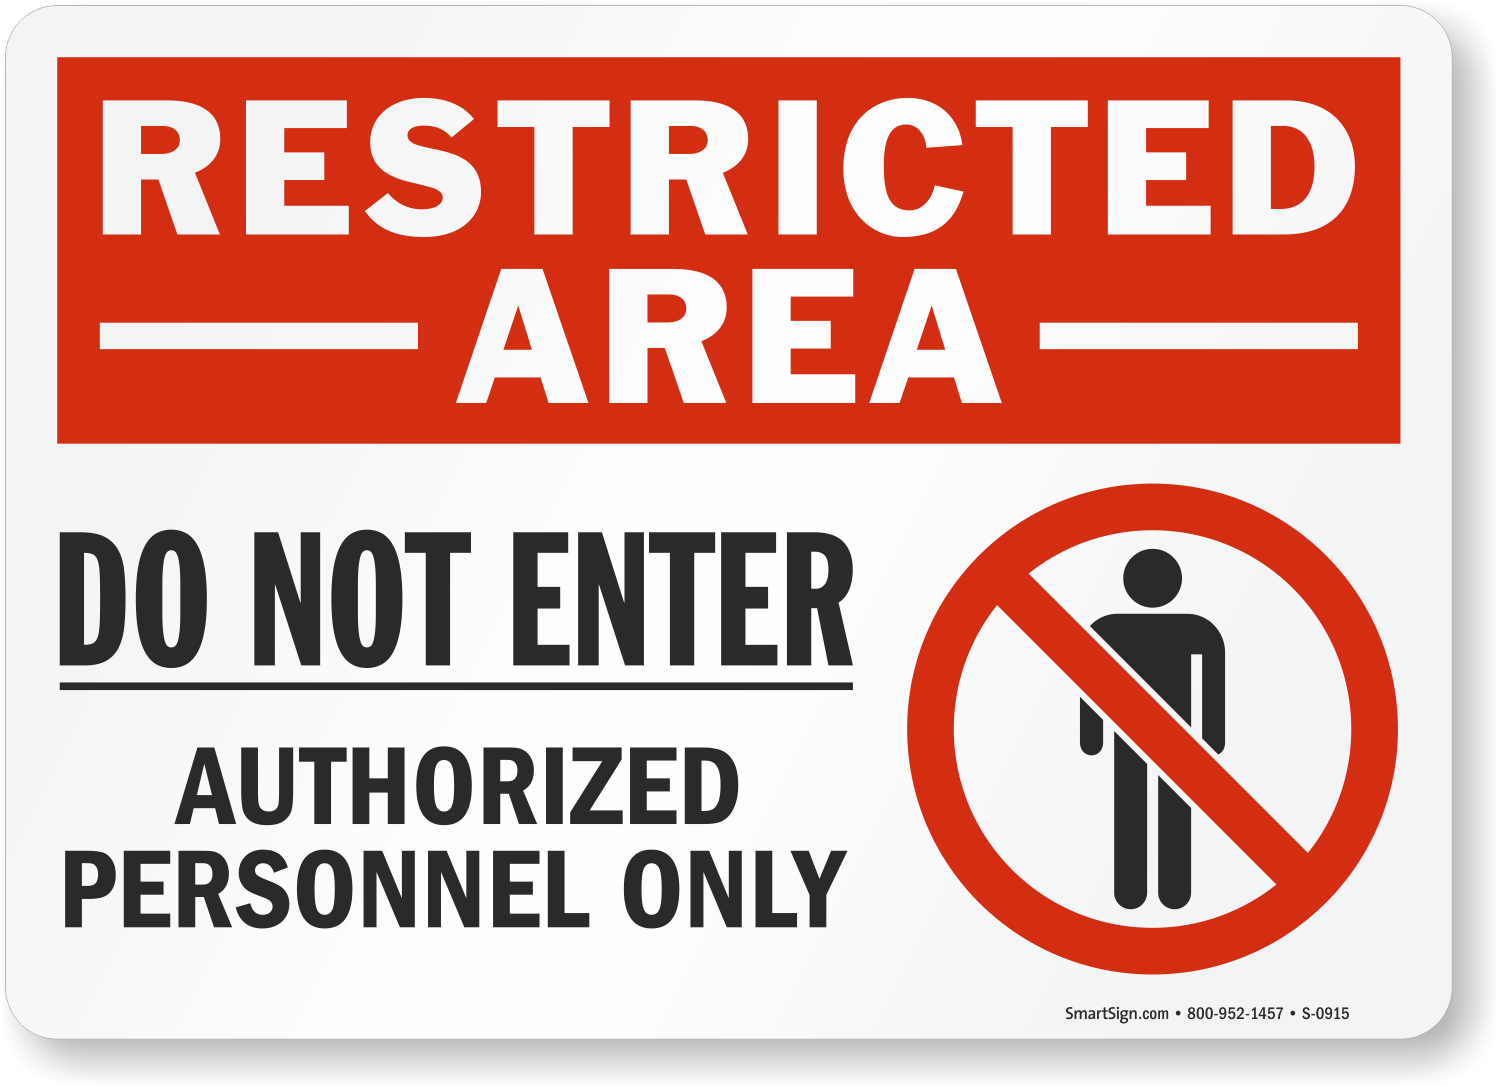 Do not re use. Authorized personnel only. Restricted area. Restricted area sign. Предупреждение restricted.